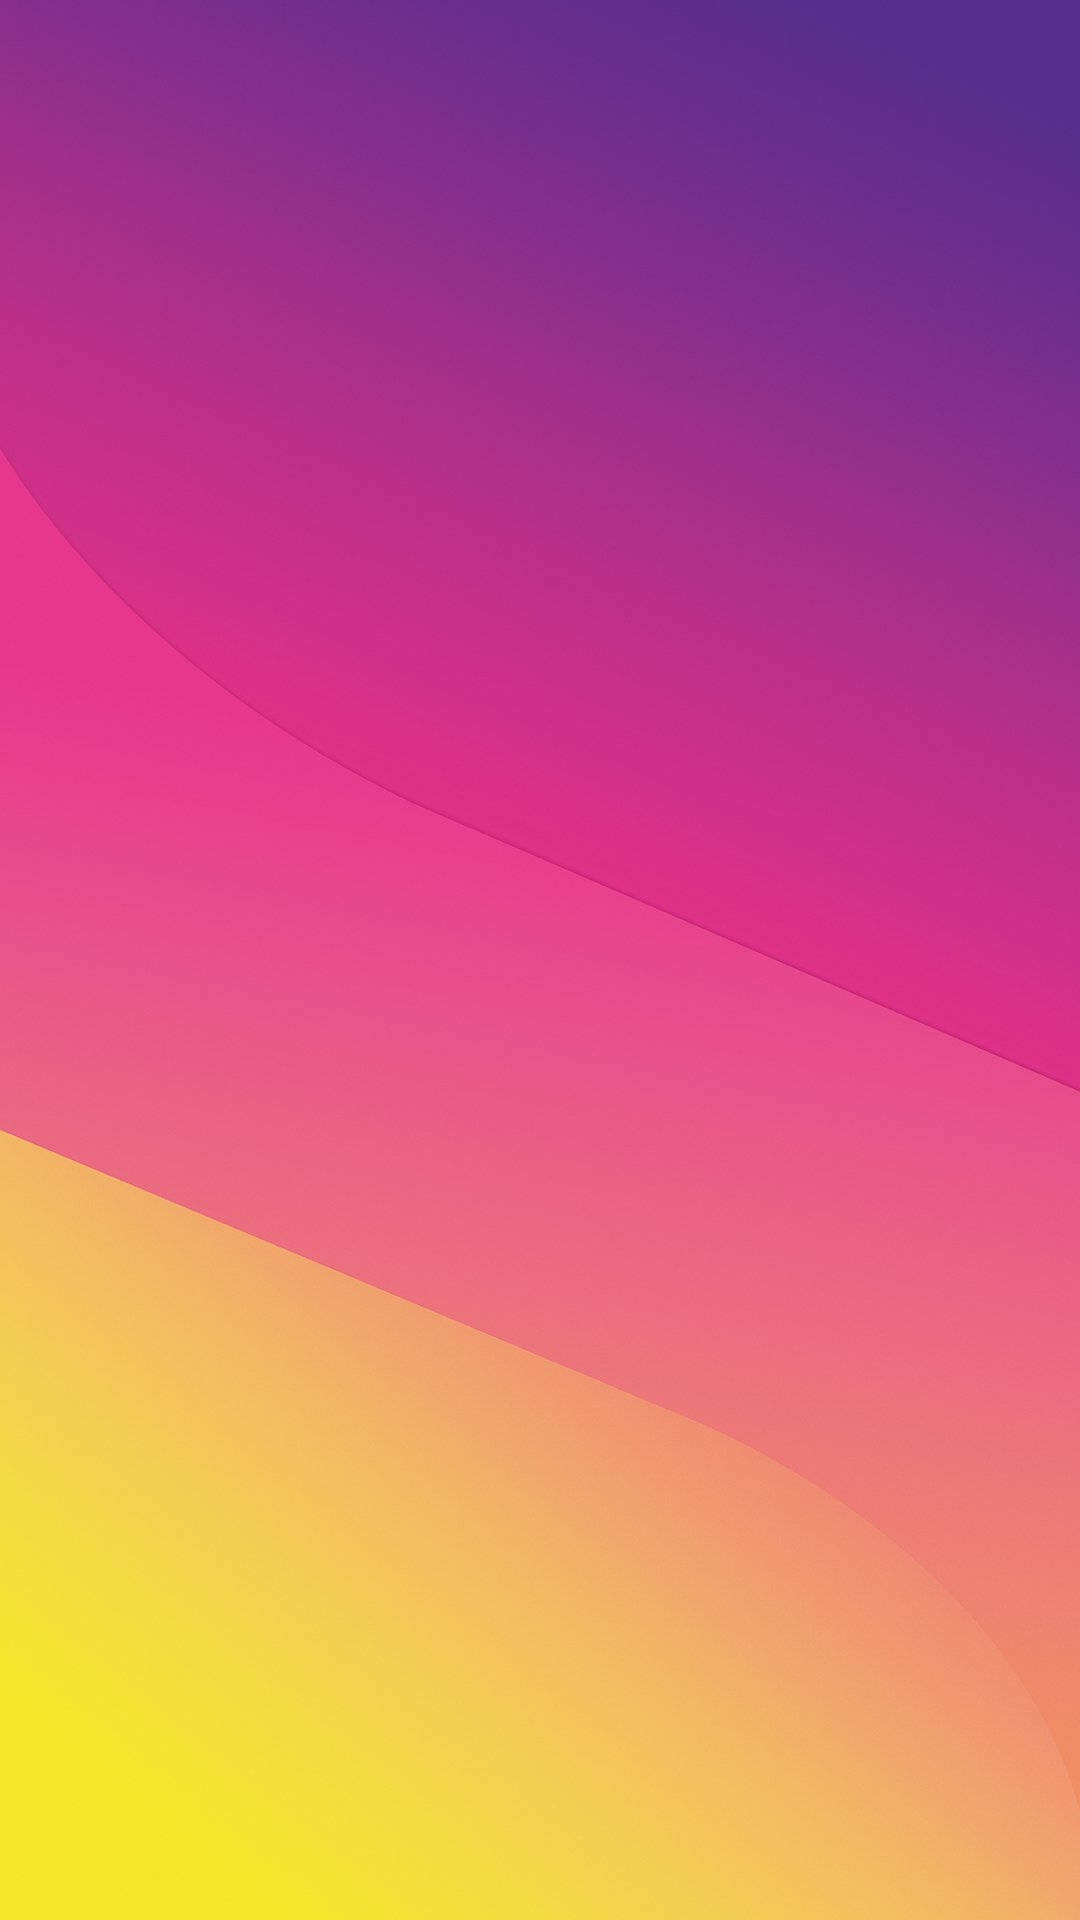 Download Abstract Gradient Oppo A5s Wallpaper 